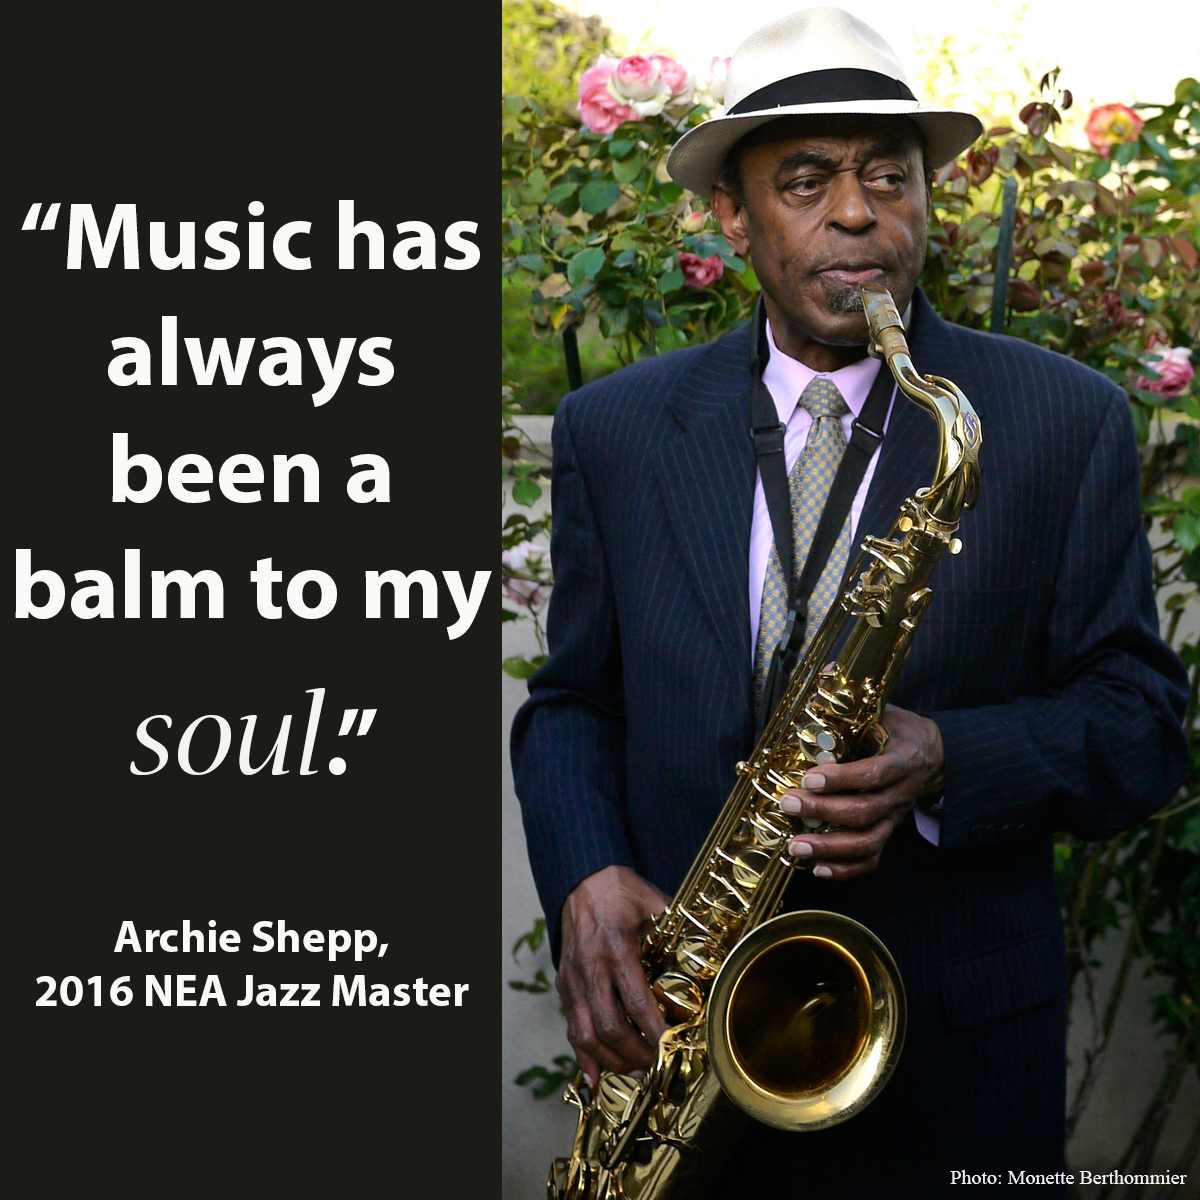 Archie Shepp playing the trumpet with quote: “Music has always been a balm to my soul.”